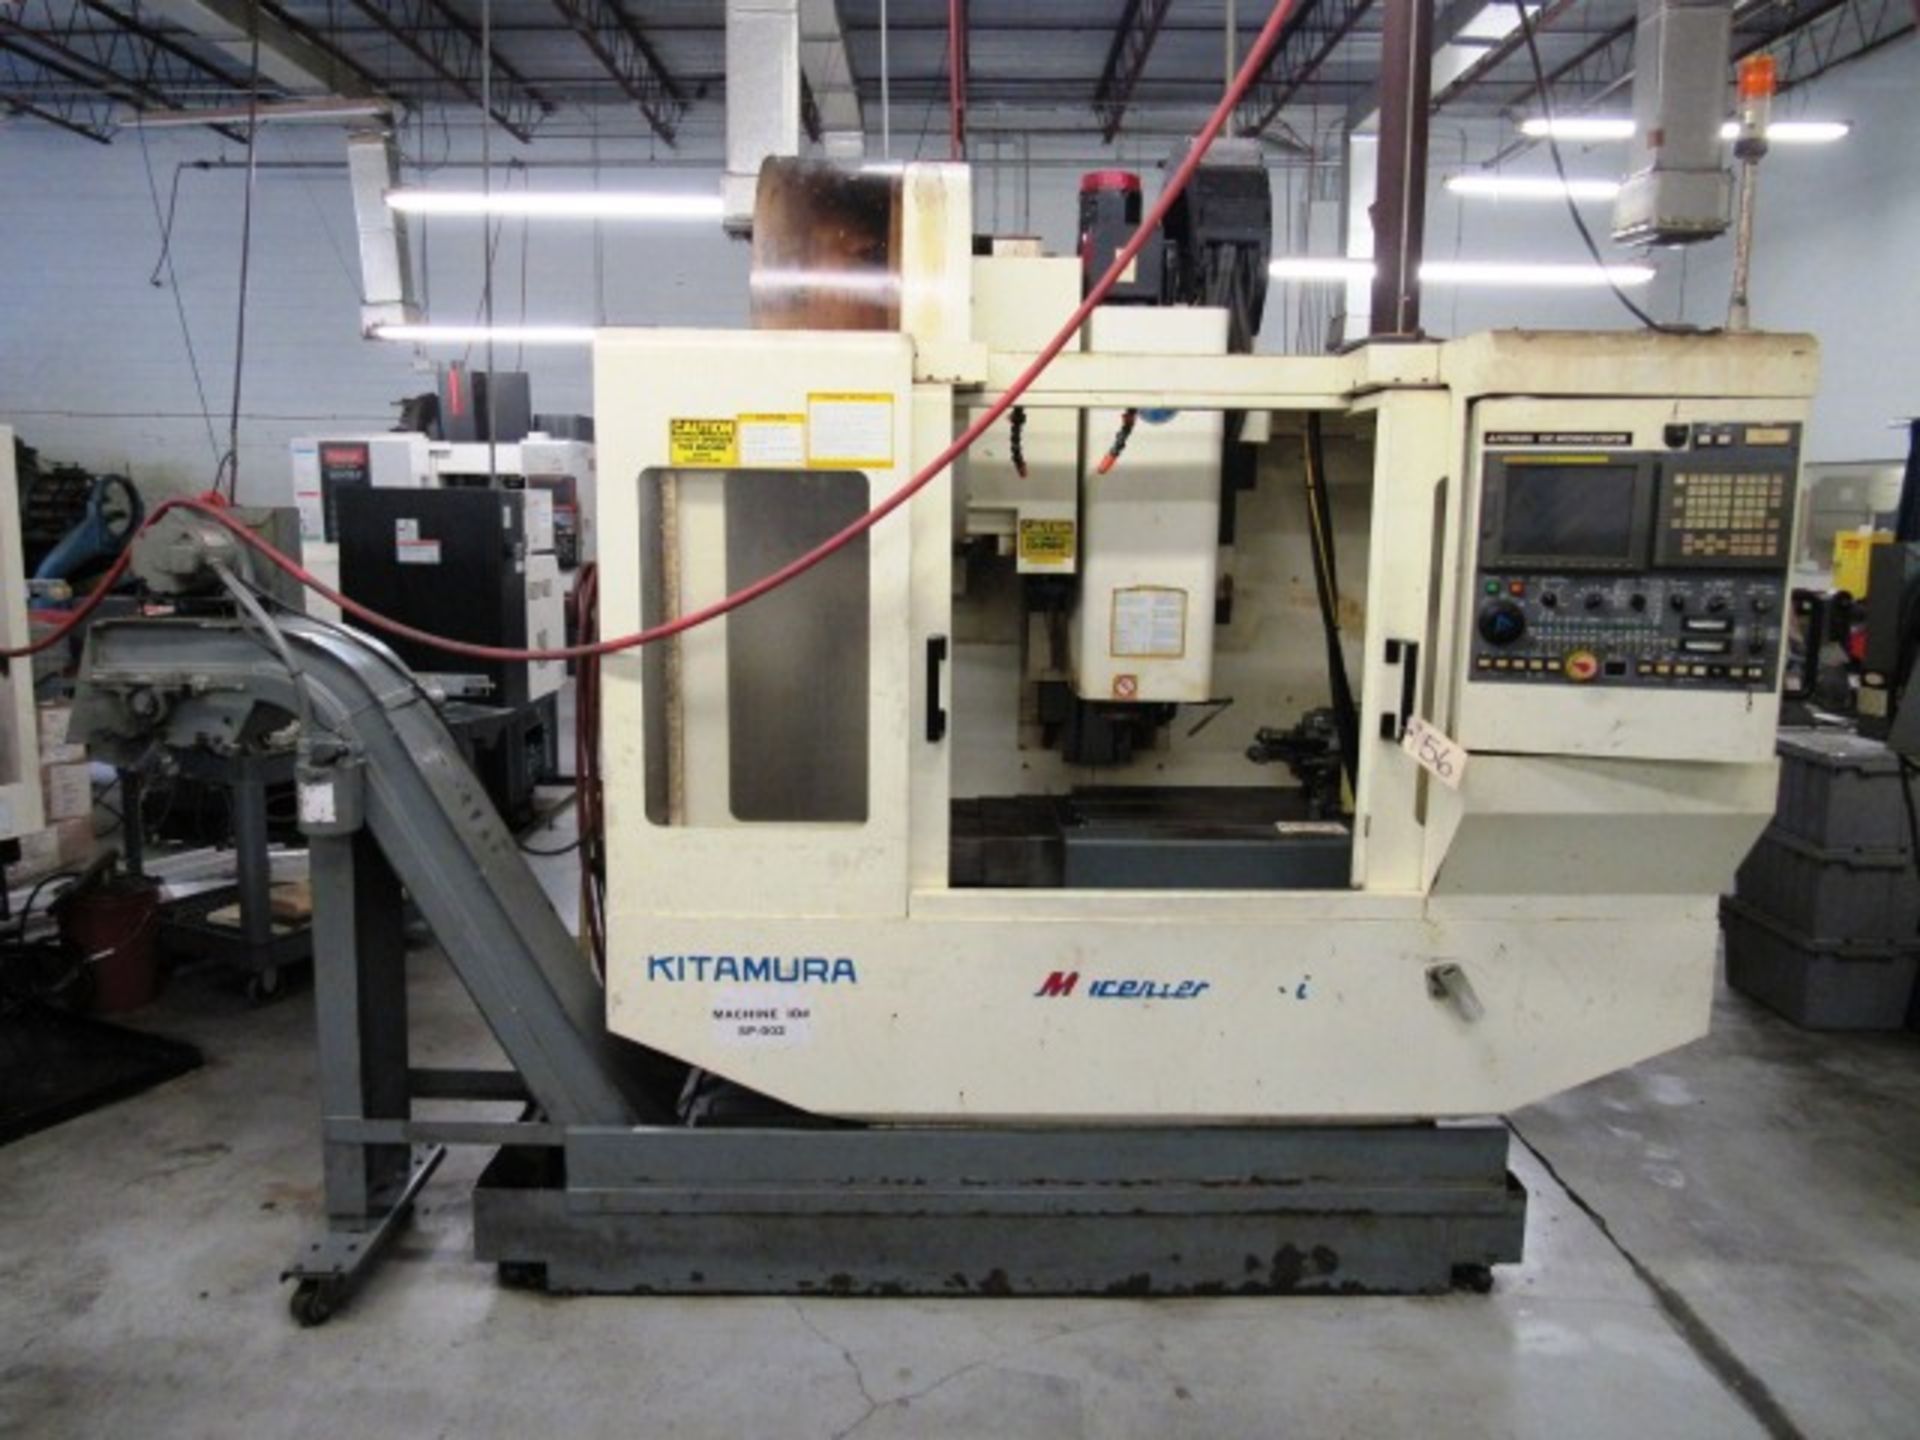 Kitamura MyCenter 3X/3Xi Wired for 4th Axis CNC Vertical Machining Center